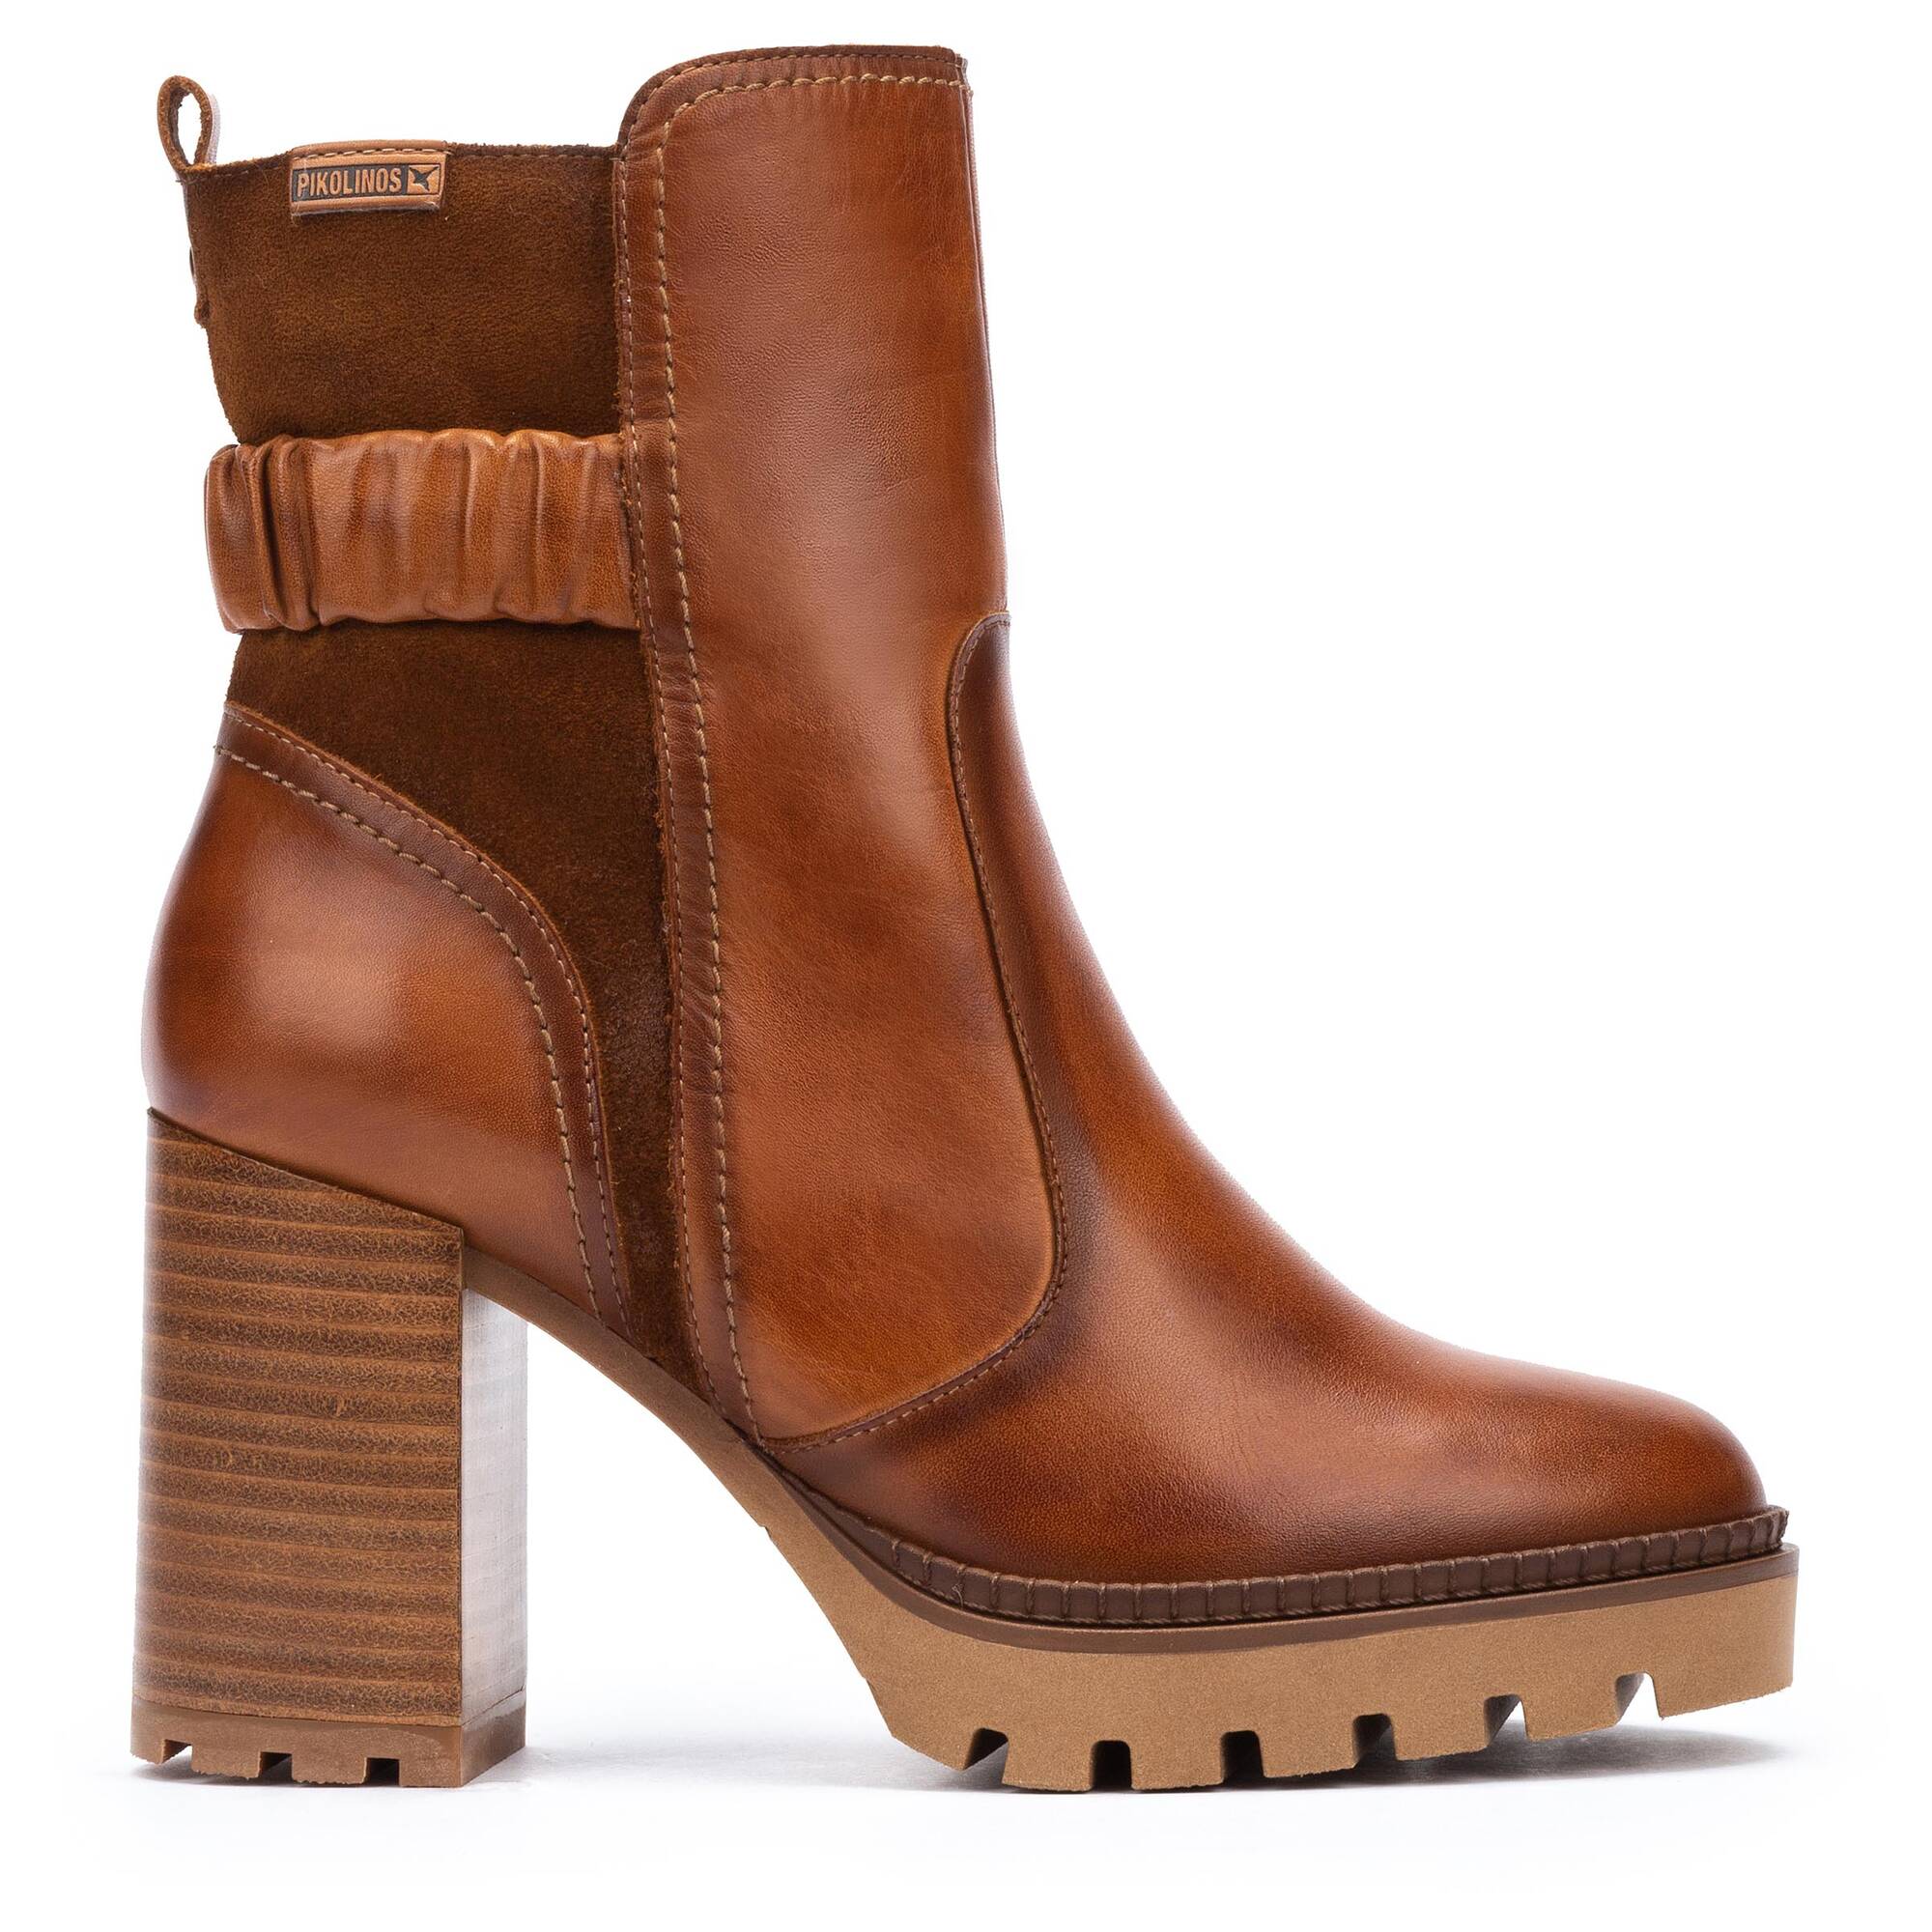 Ankle boots | CERVERA W1H-8579C1, BRANDY, large image number 10 | null